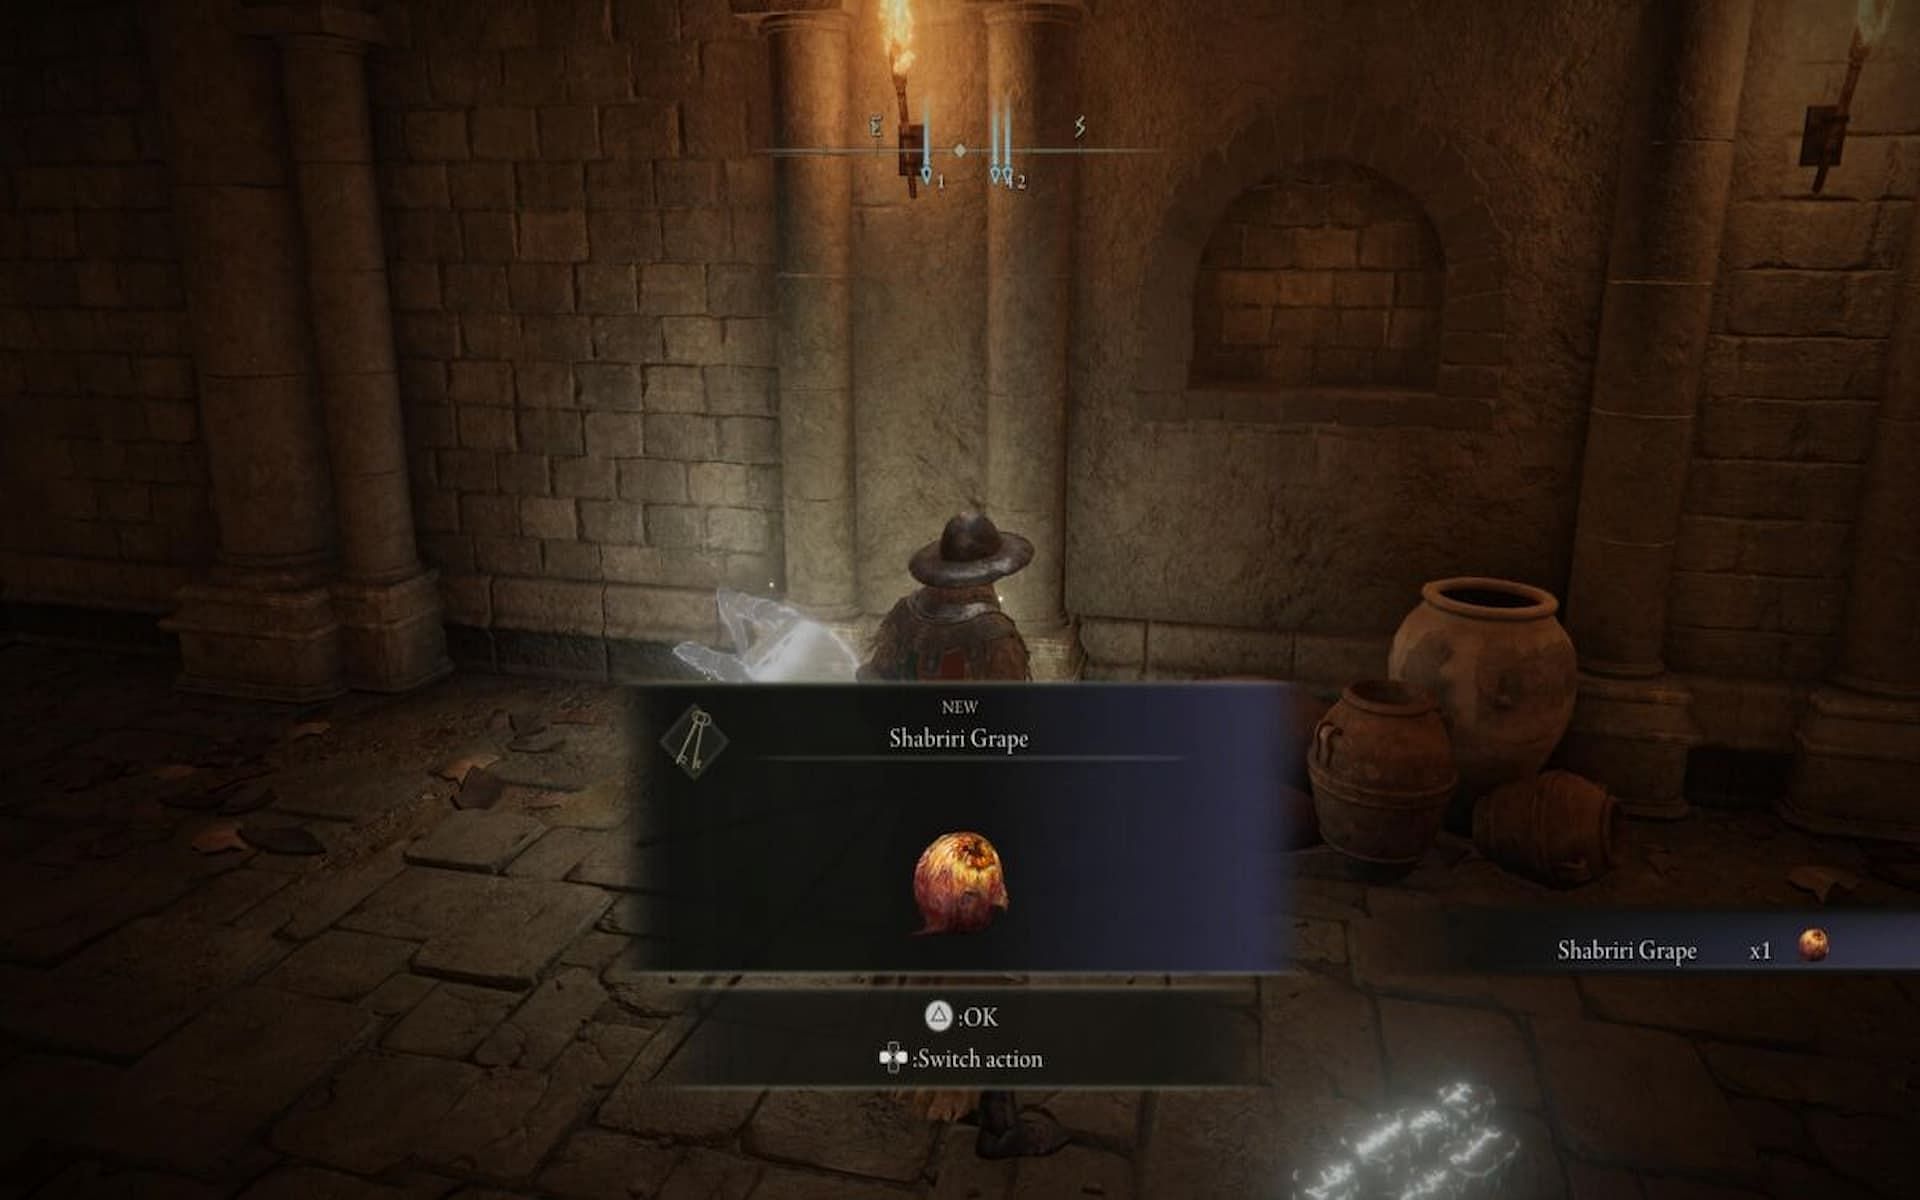 A player has come across a Shabriri Grape in Elden Ring (Image via FromSoftware Inc.)